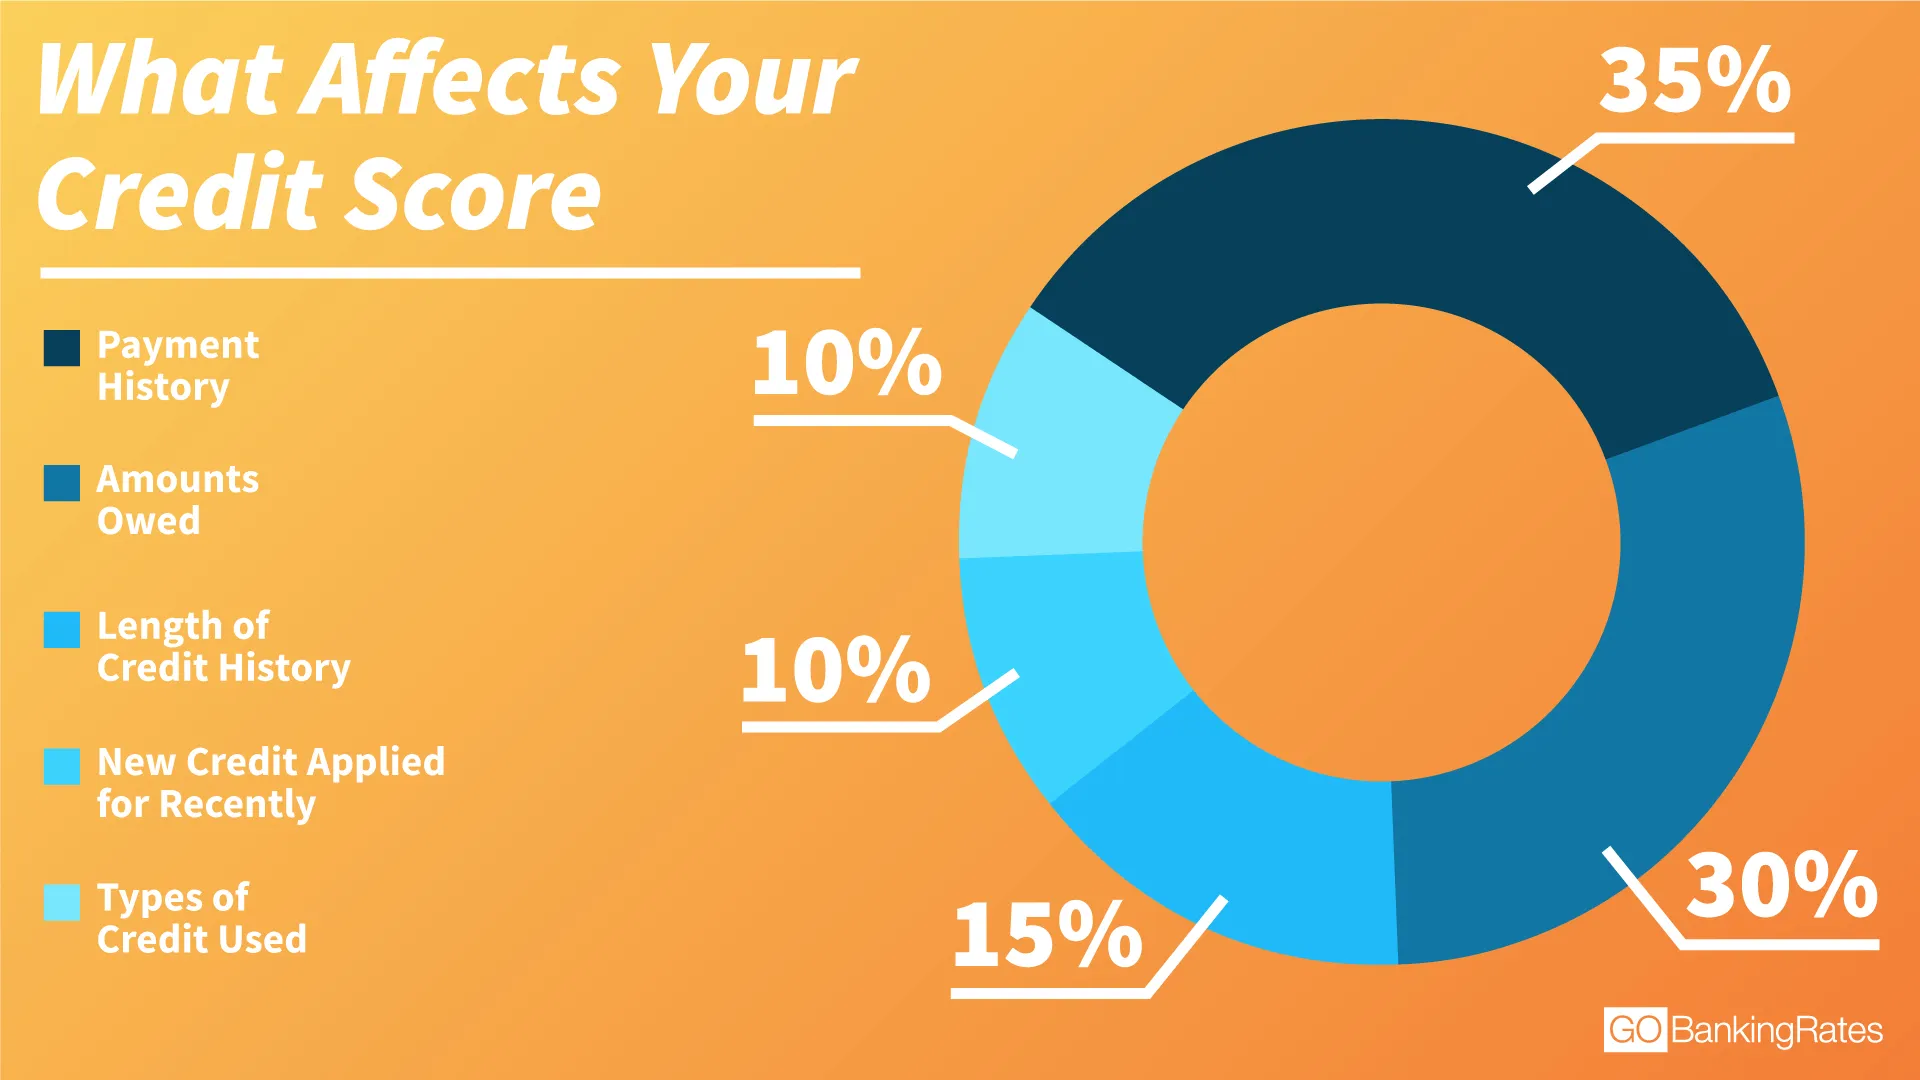 What Affects Credit Score